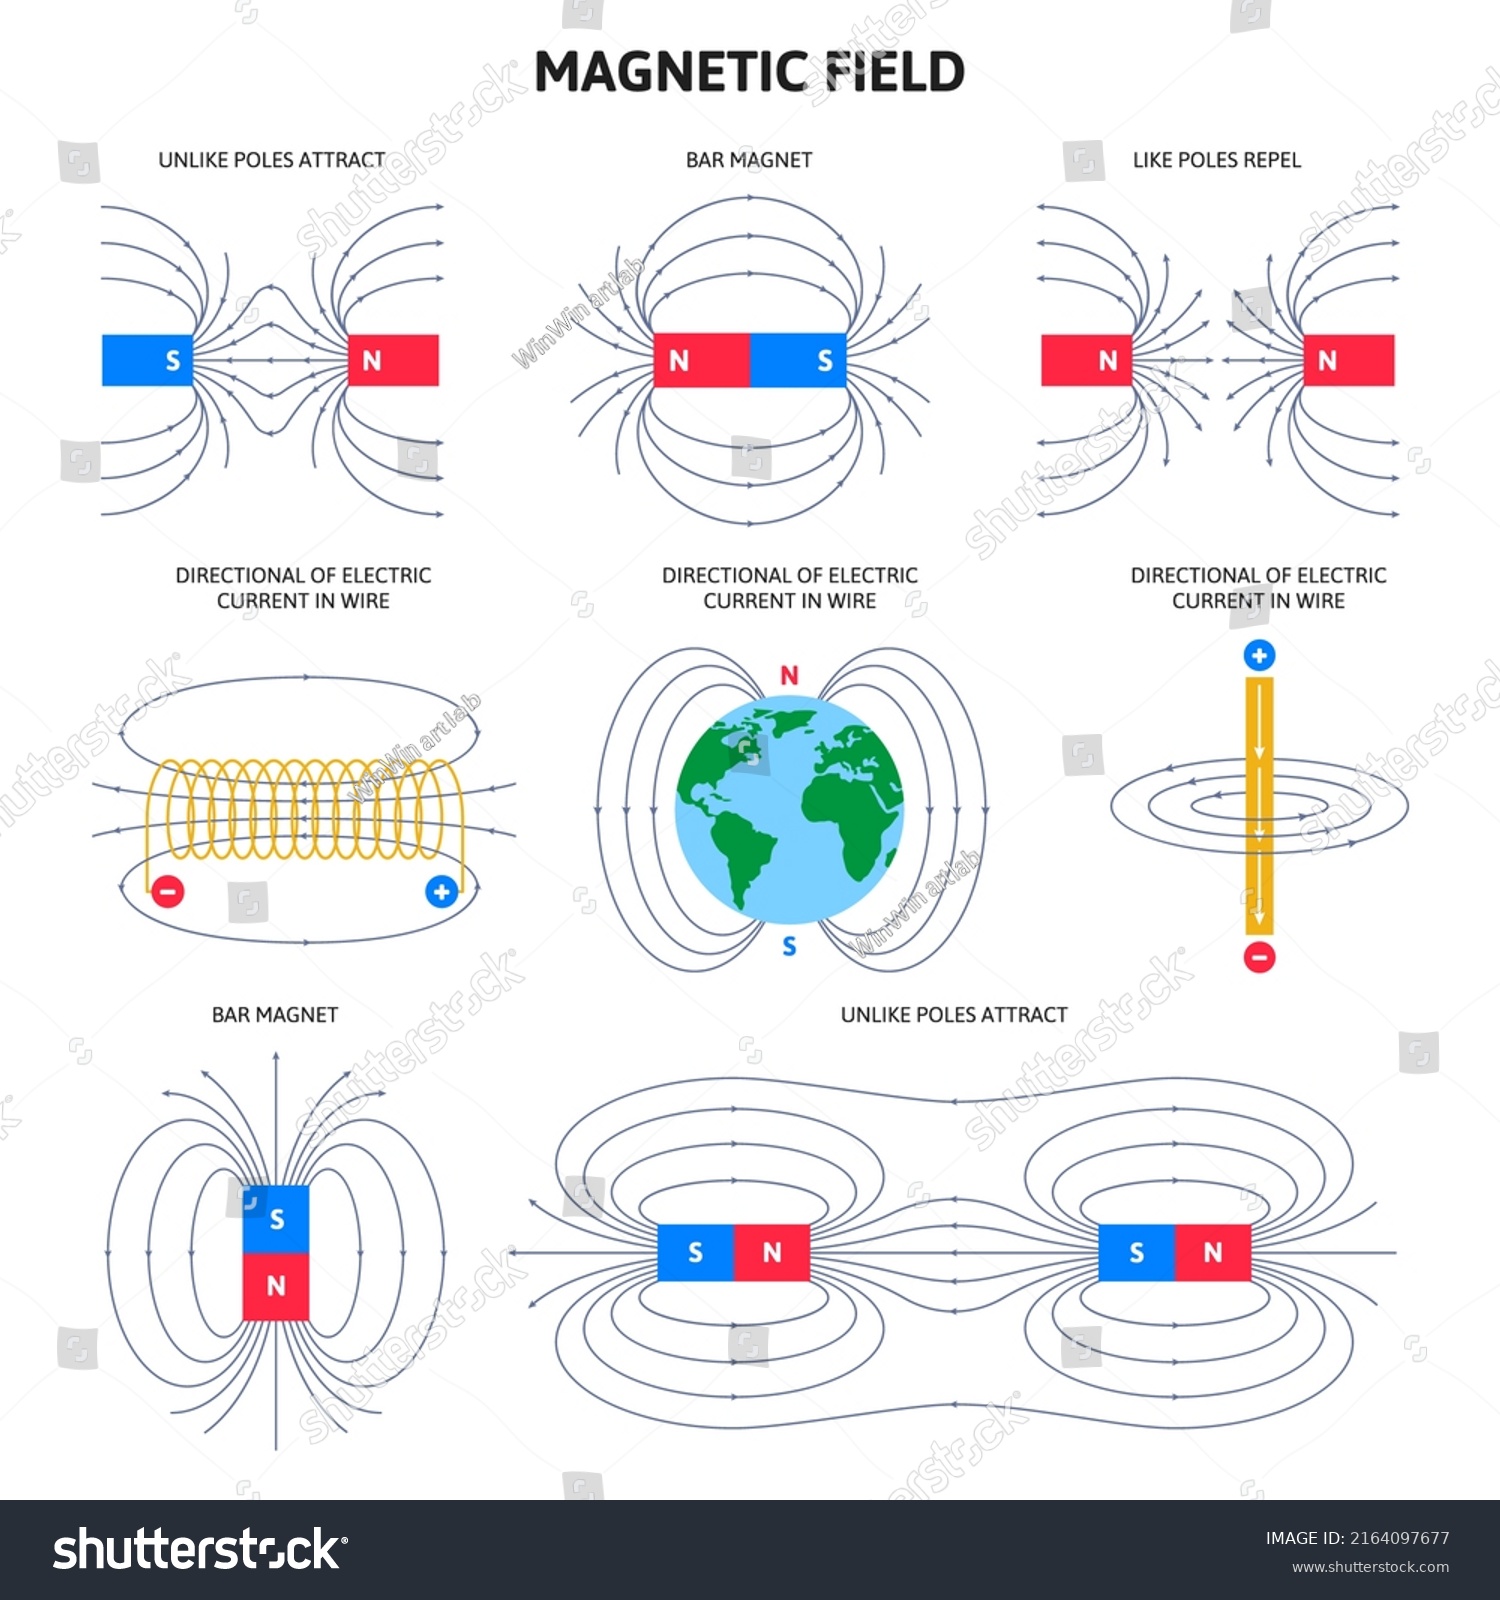 Electromagnetic Field Magnetic Force Physics Magnetism Stock Illustration 2164097677 Shutterstock 3231